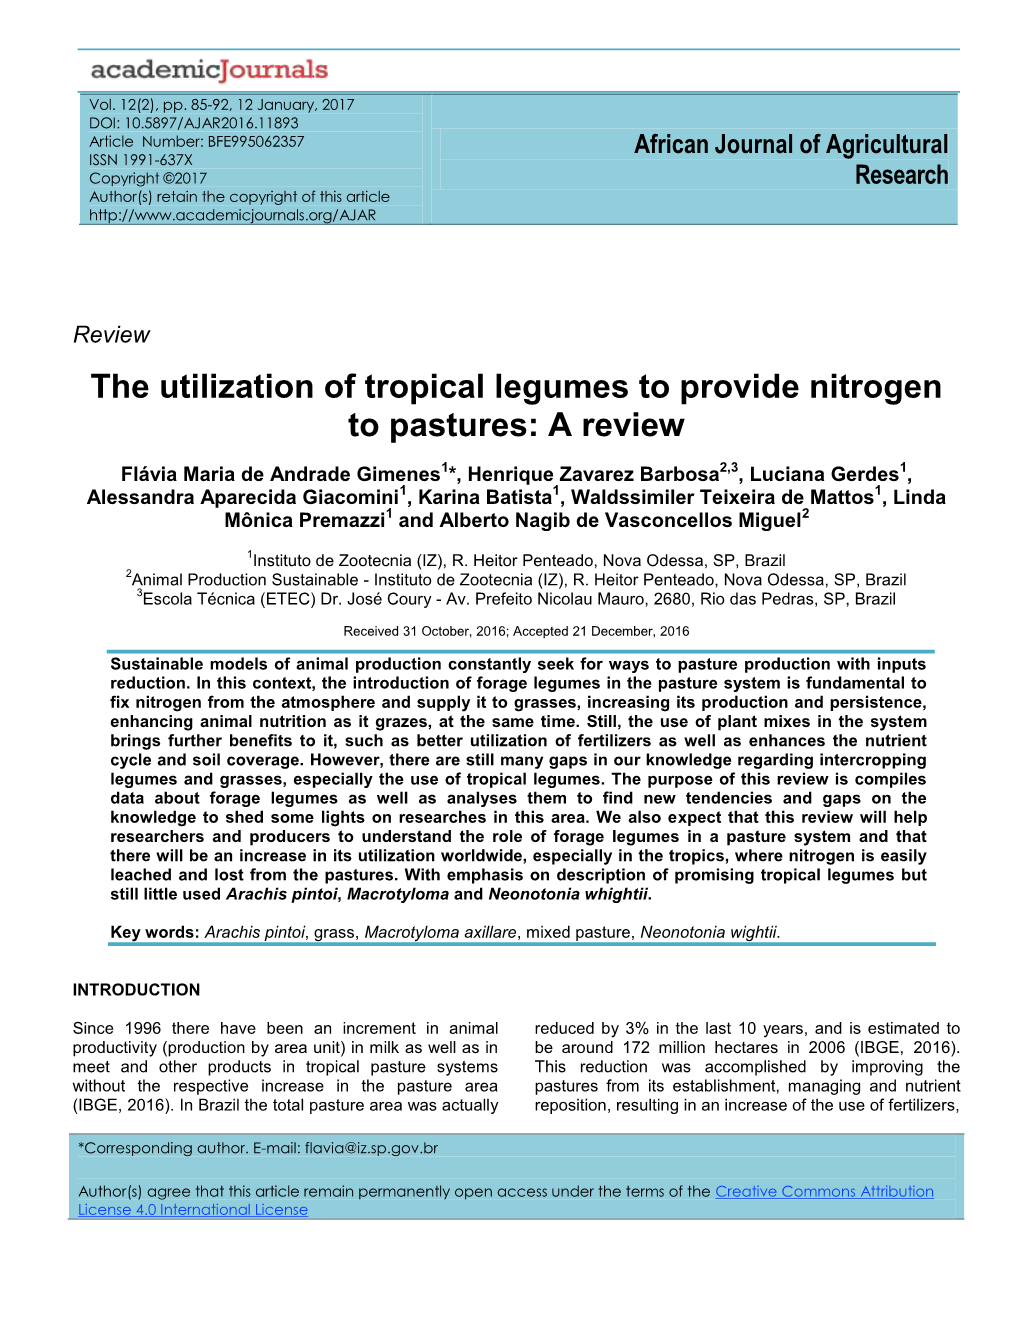 The Utilization of Tropical Legumes to Provide Nitrogen to Pastures: a Review